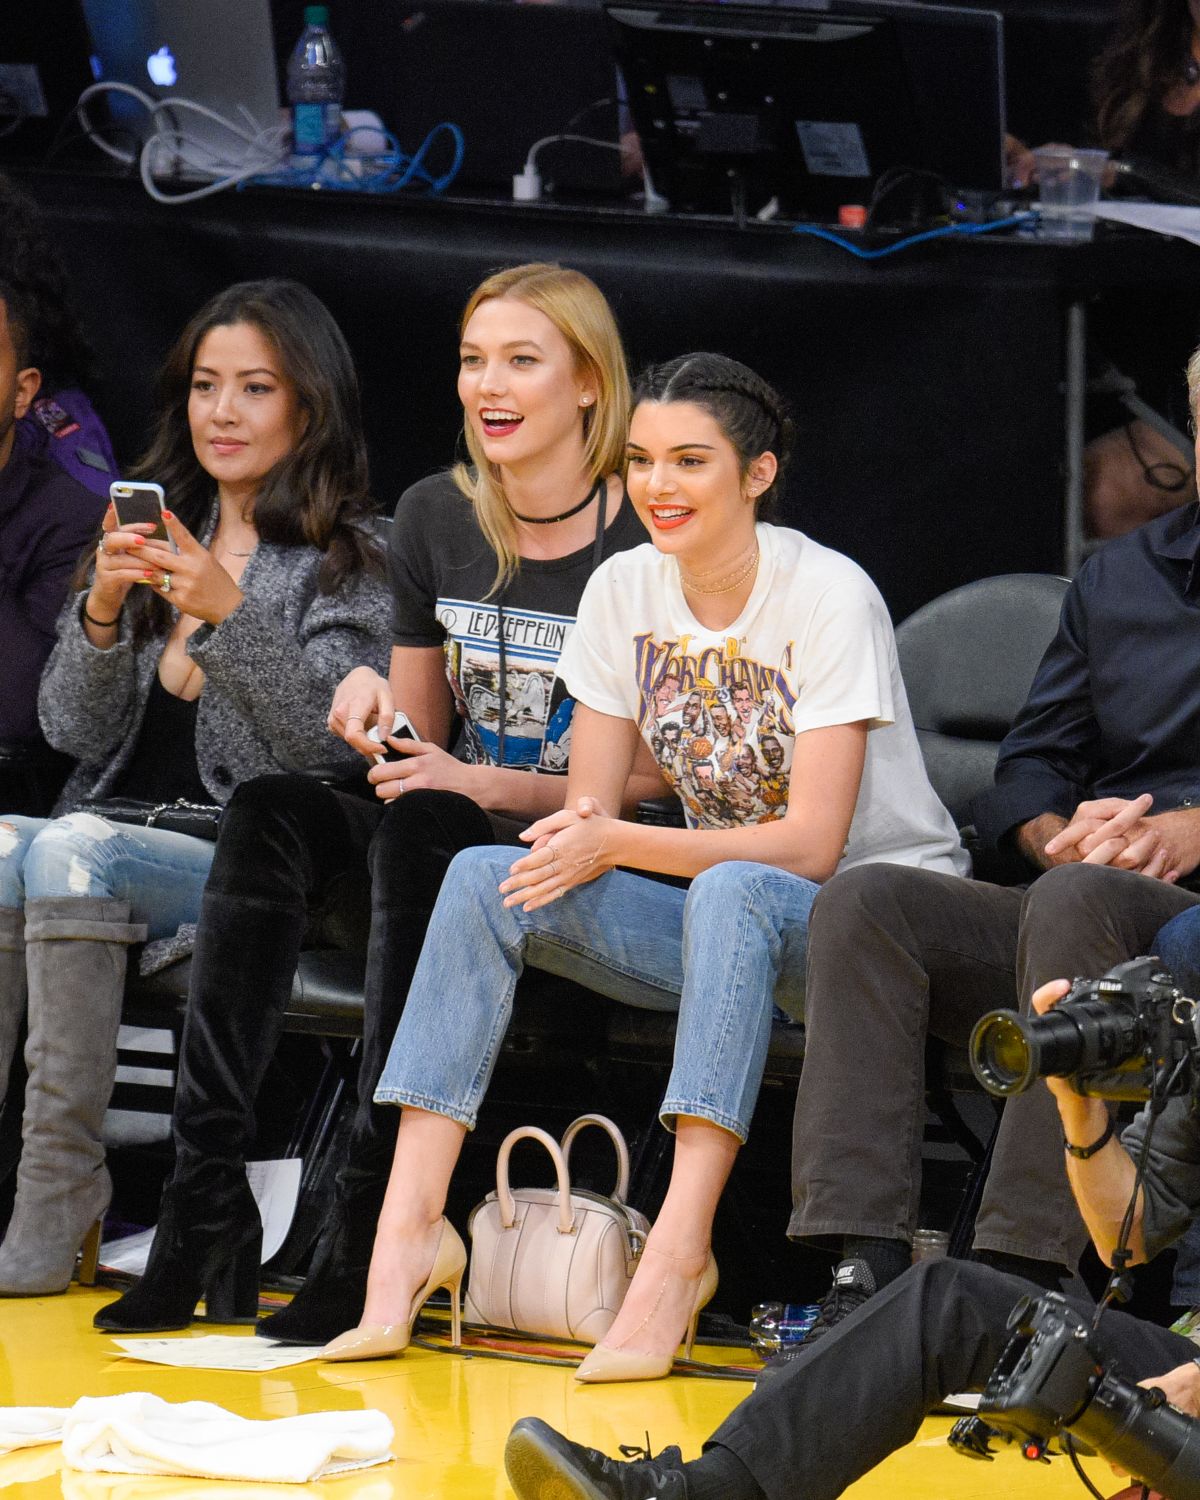 KENDALL JENNER and KARLIE KLOSS at Houston Rockets vs LA Lakers Game in Los Angeles 10 ...1200 x 1500